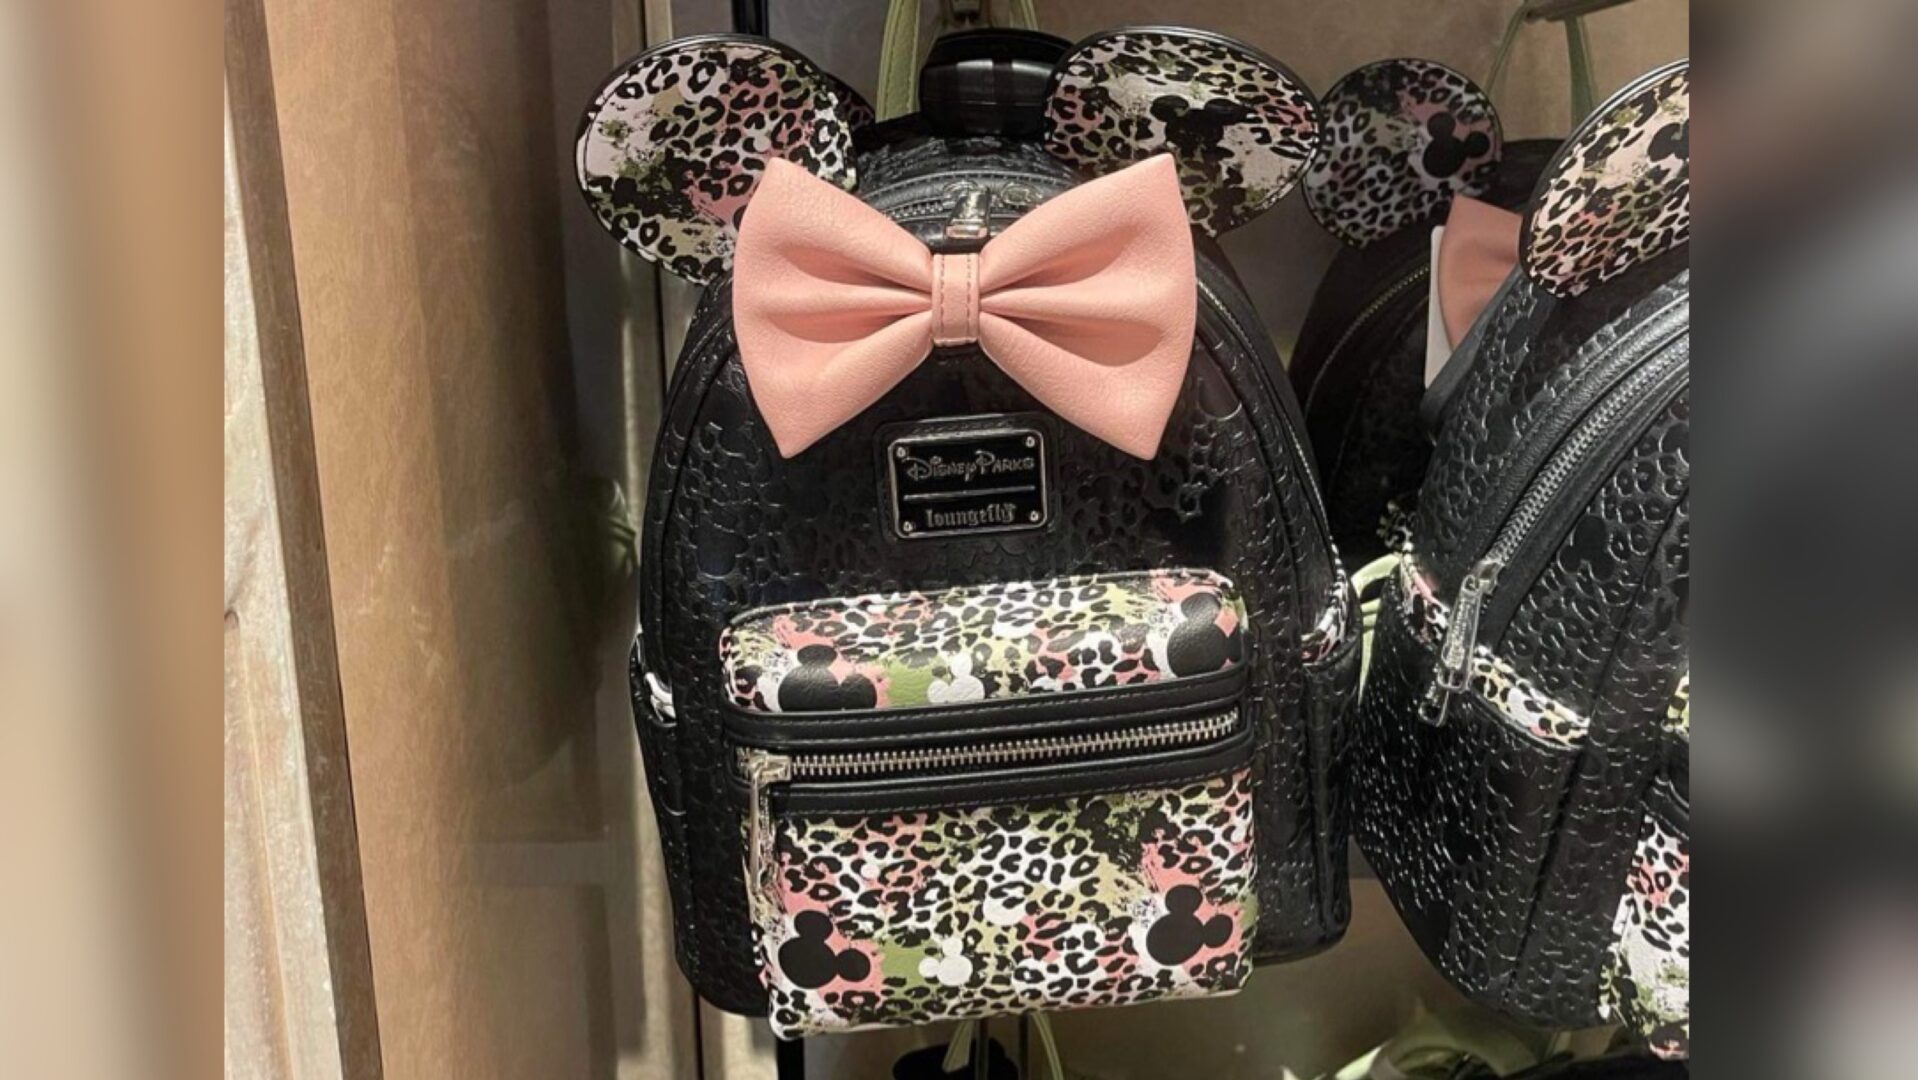 New Minnie Mouse Animal Print Loungefly Backpack For A Wild Style!